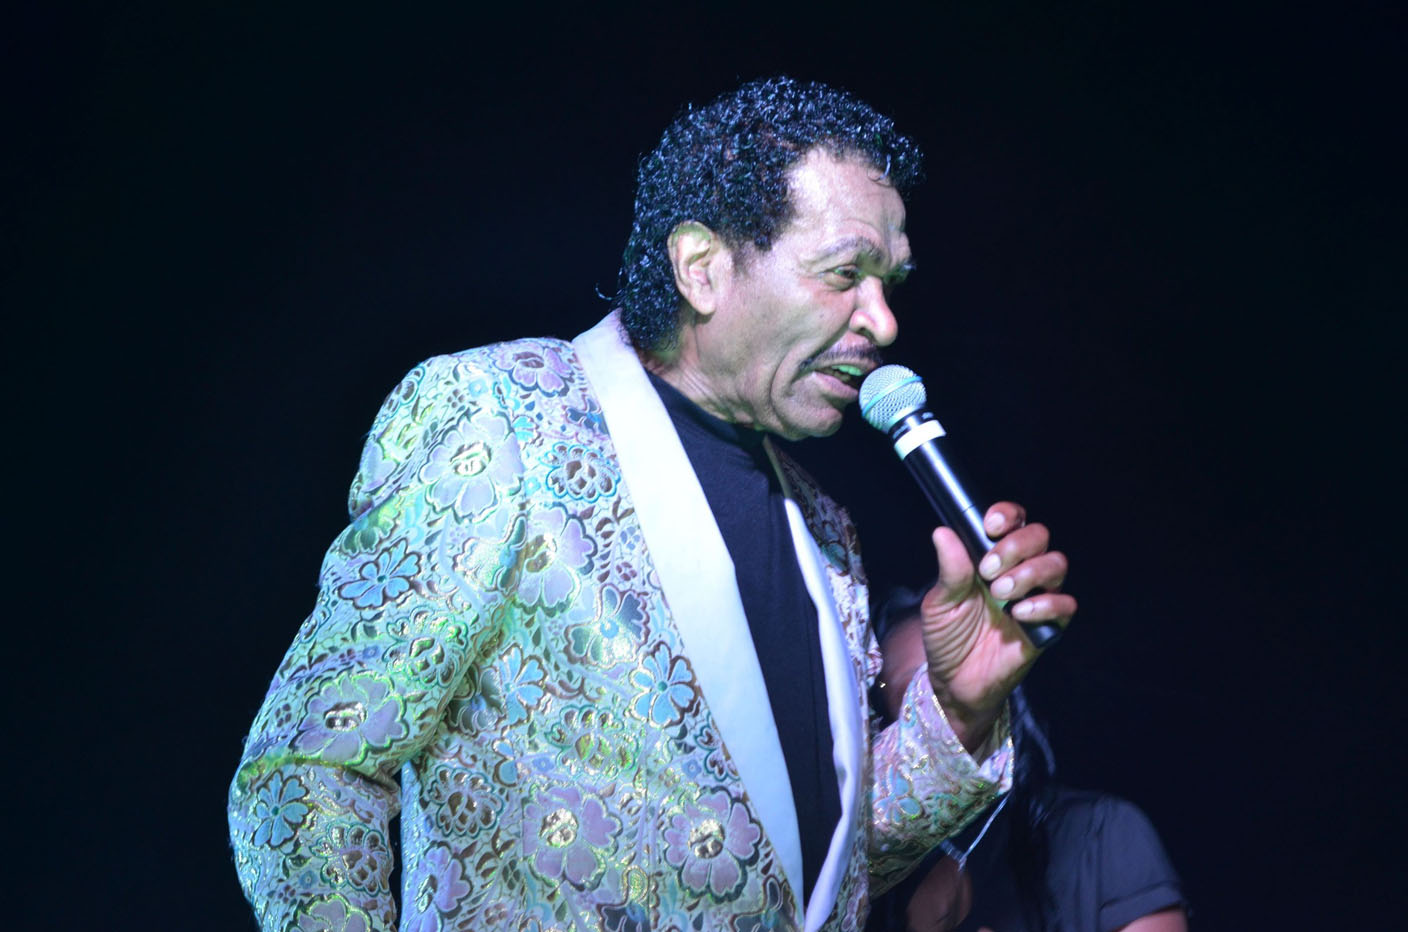 LIVE! in NWA: Bobby Rush shares songs and stories at The Juke Joint